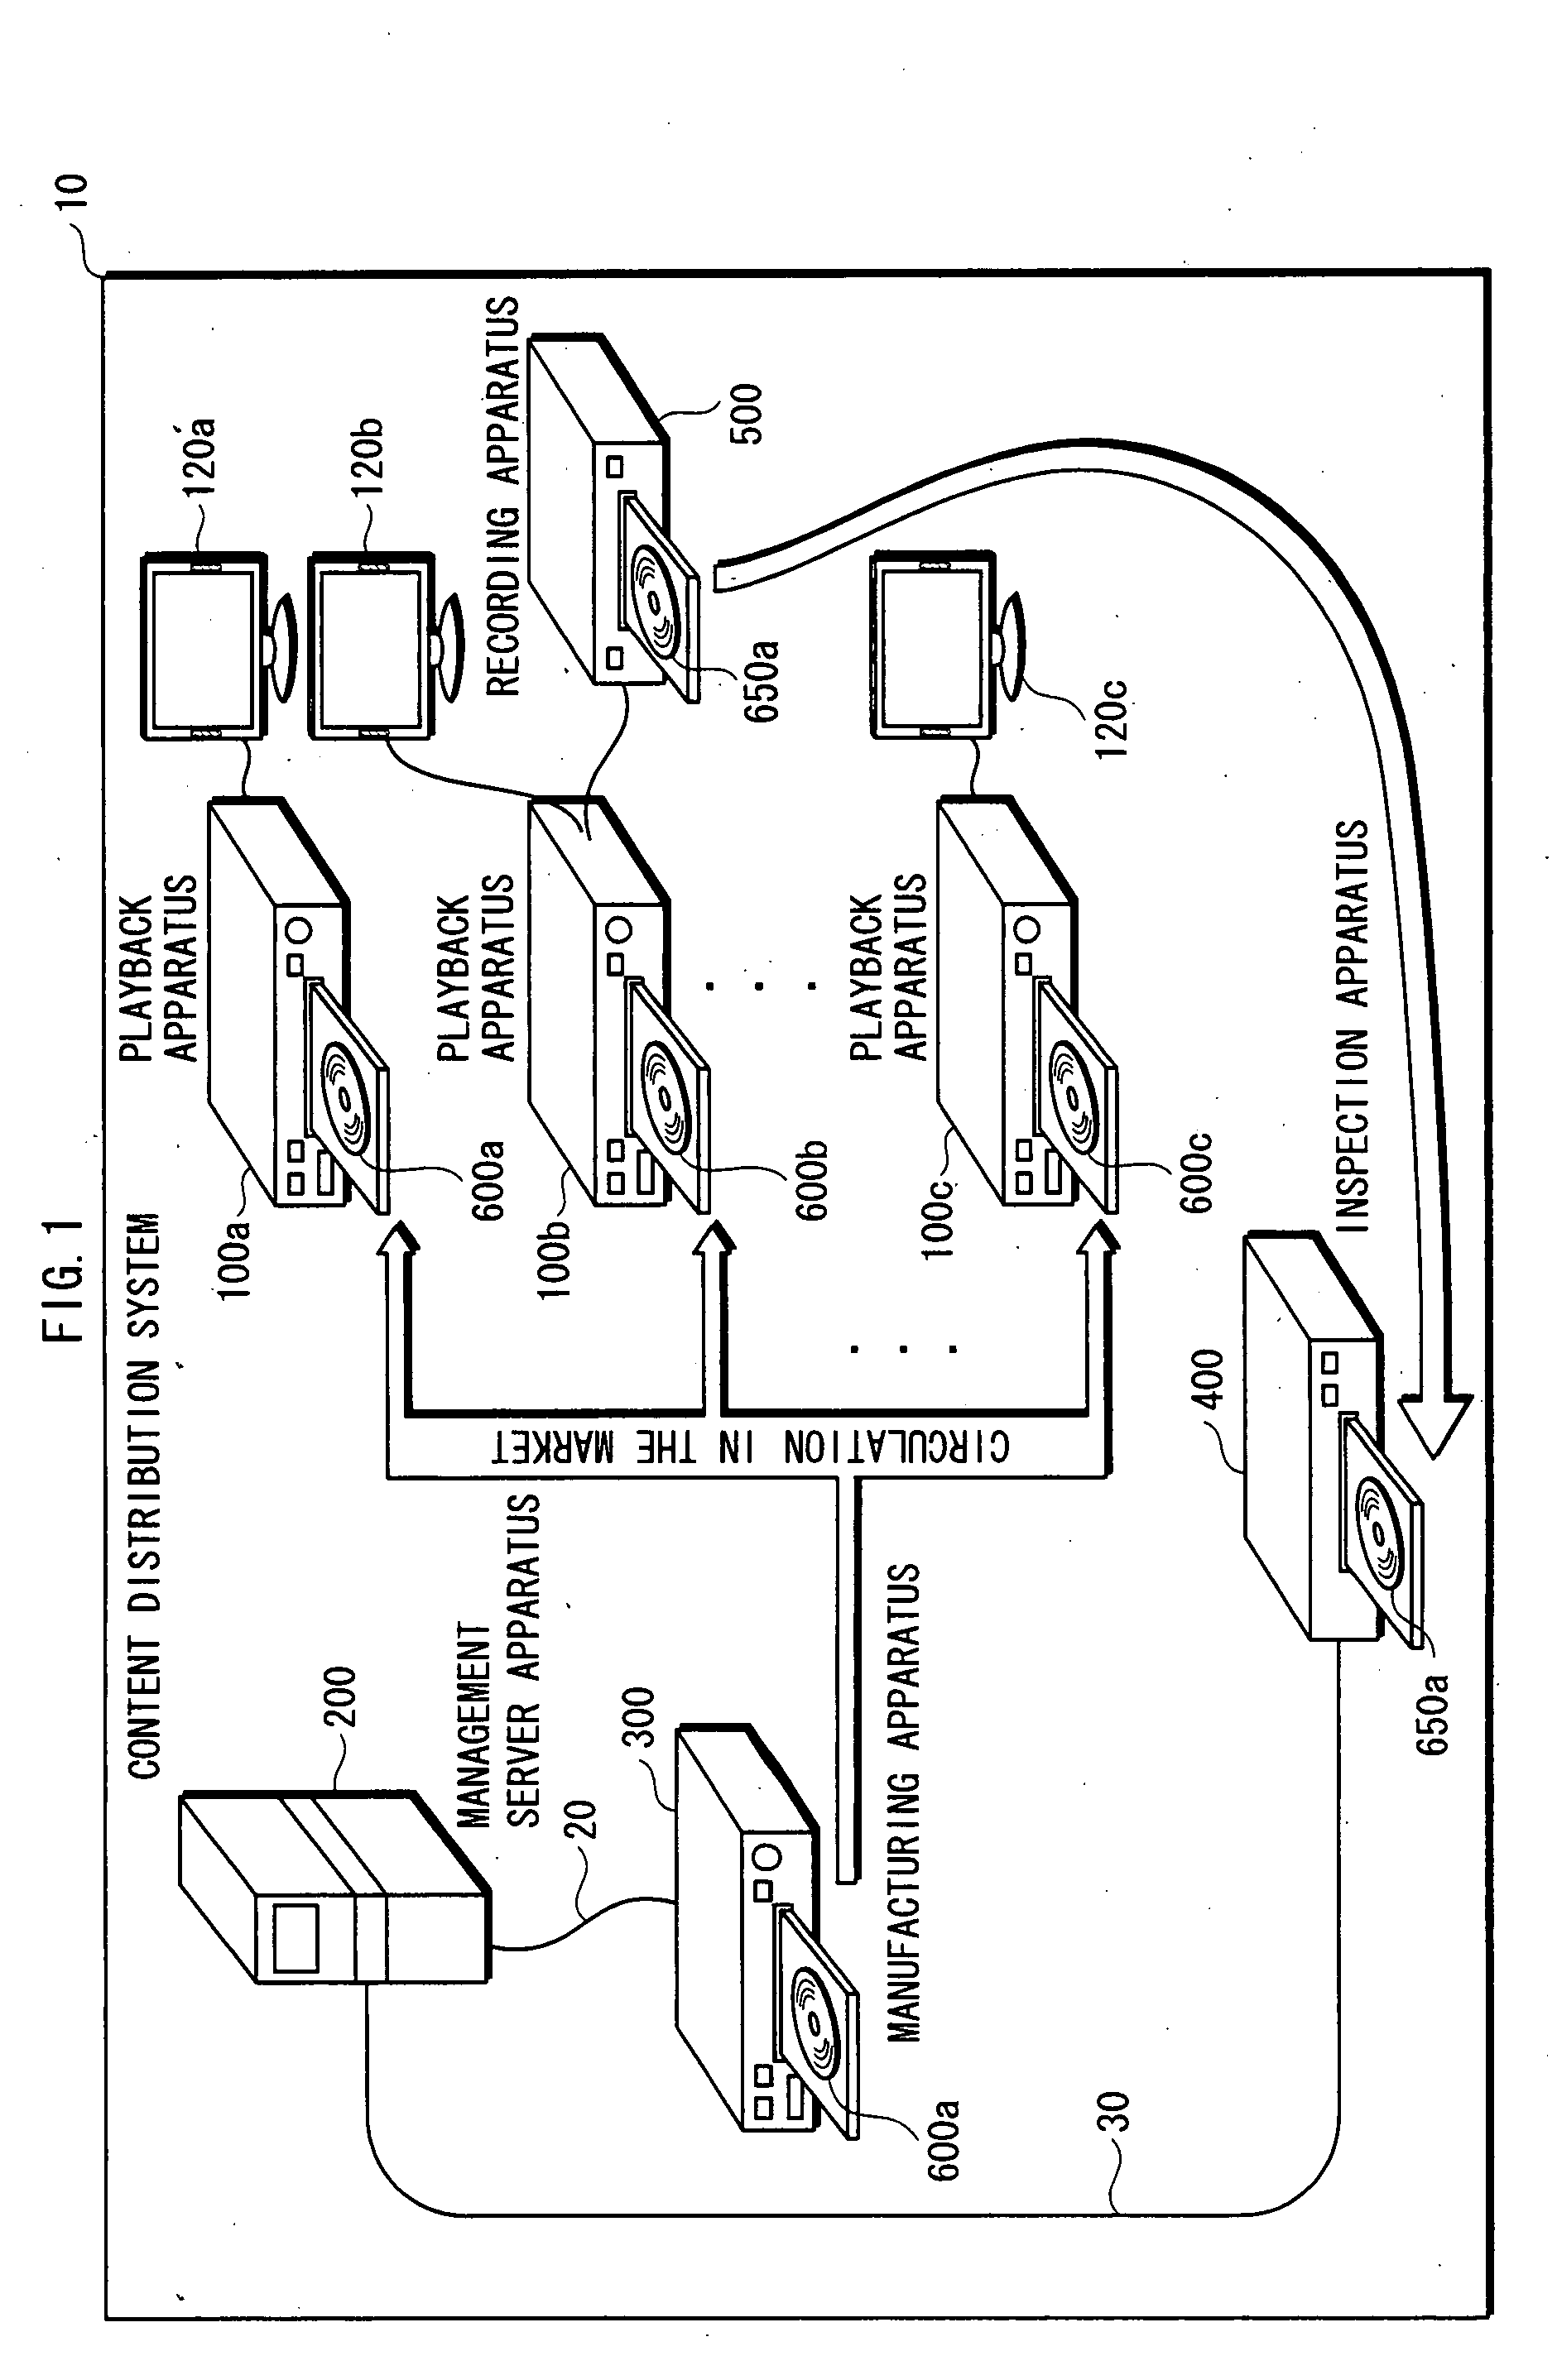 Management Server Device, Content Repoduction Device, and Recording Medium